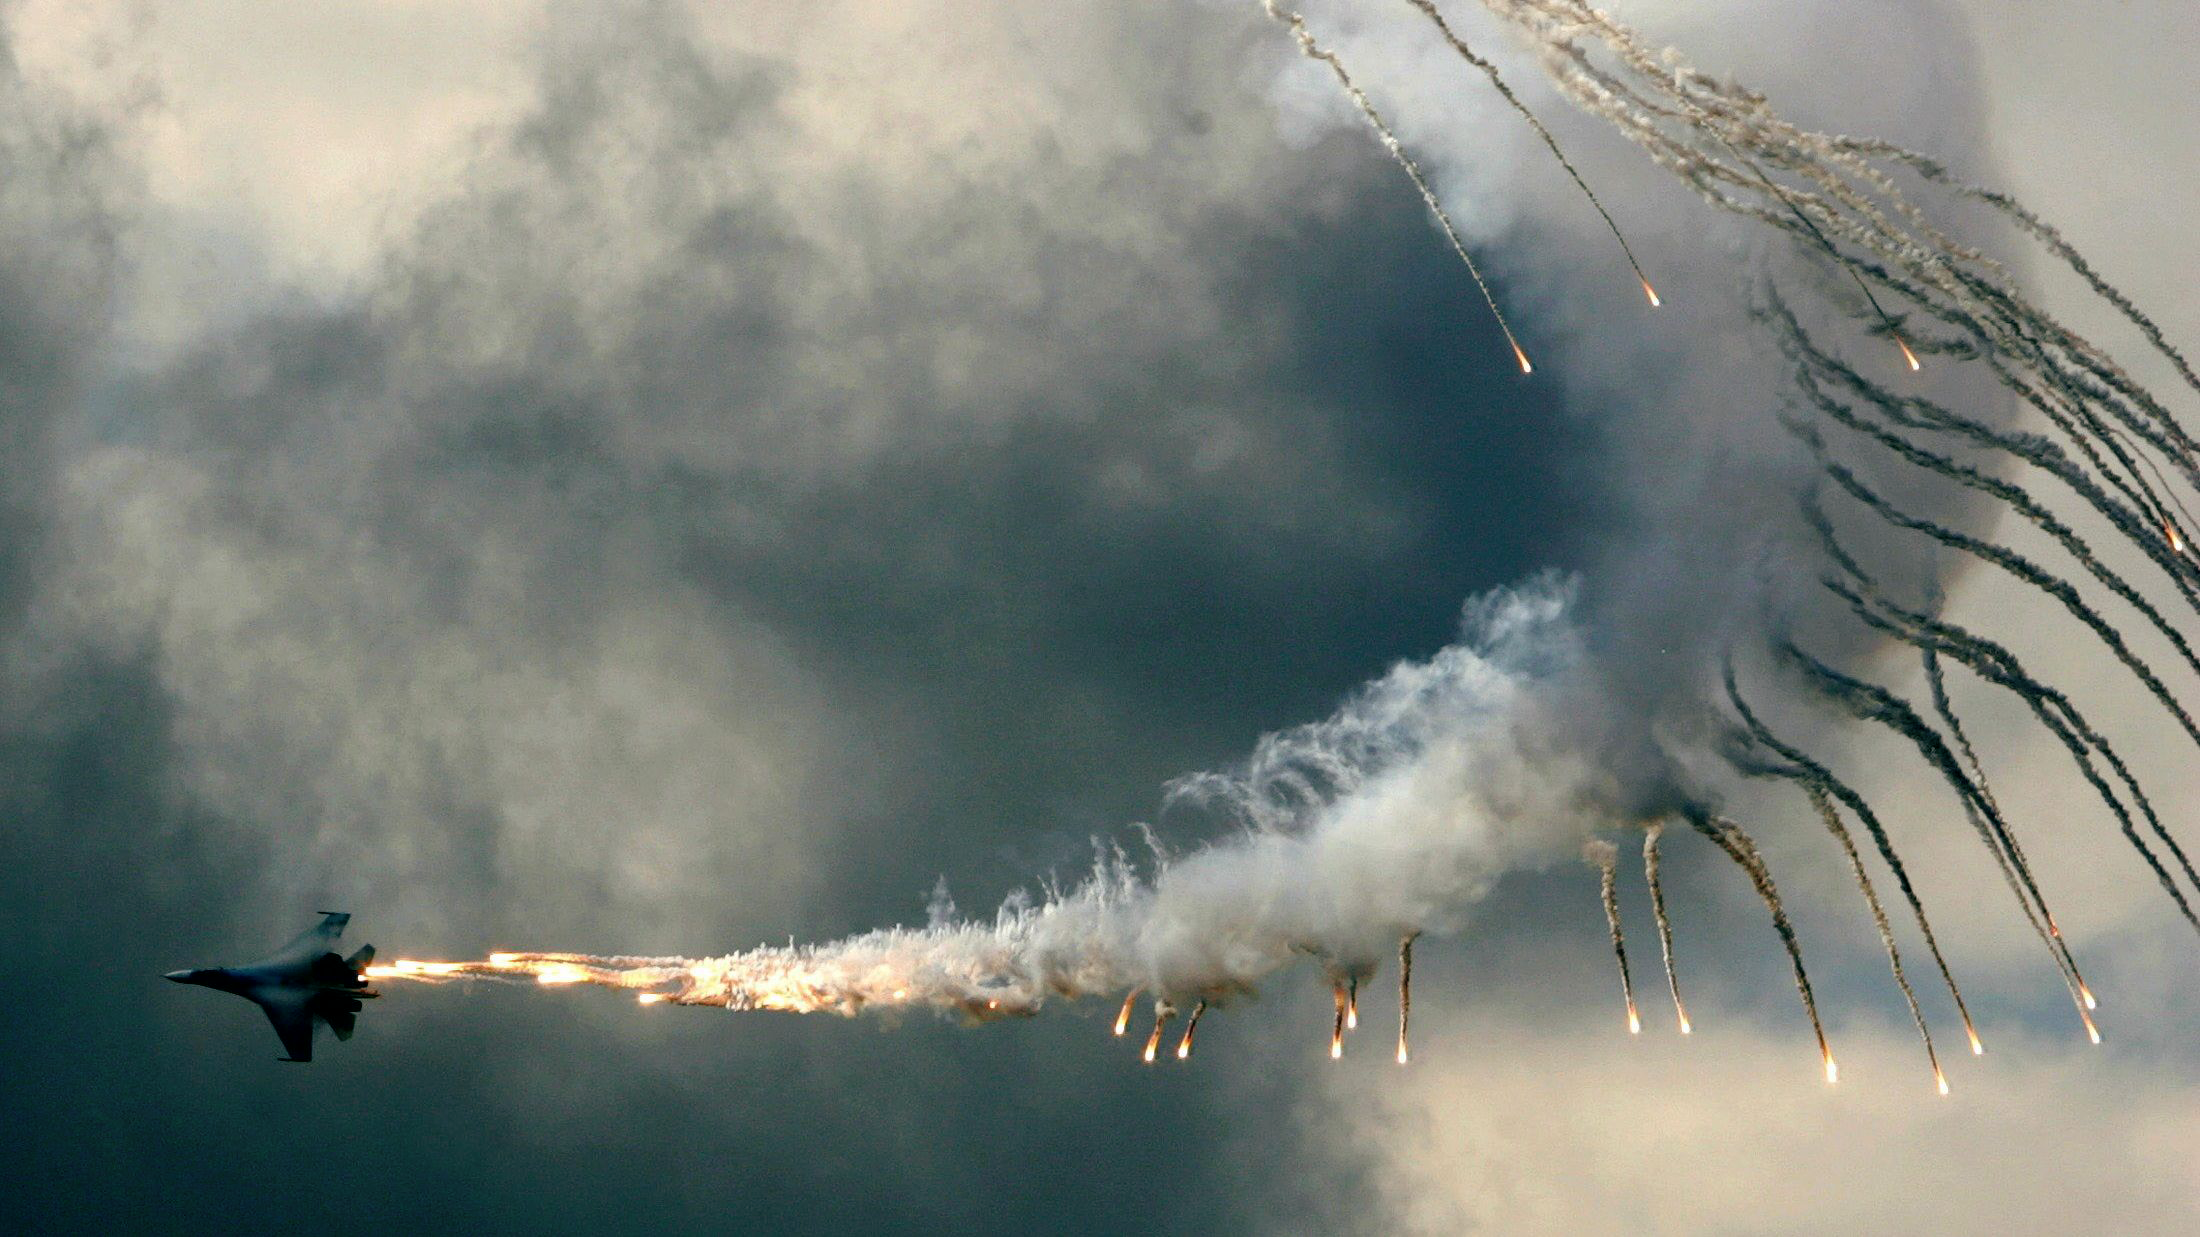 General 2200x1237 smoke sky clouds fire Sukhoi Su-27 flares jet fighter military Sukhoi Russian/Soviet aircraft